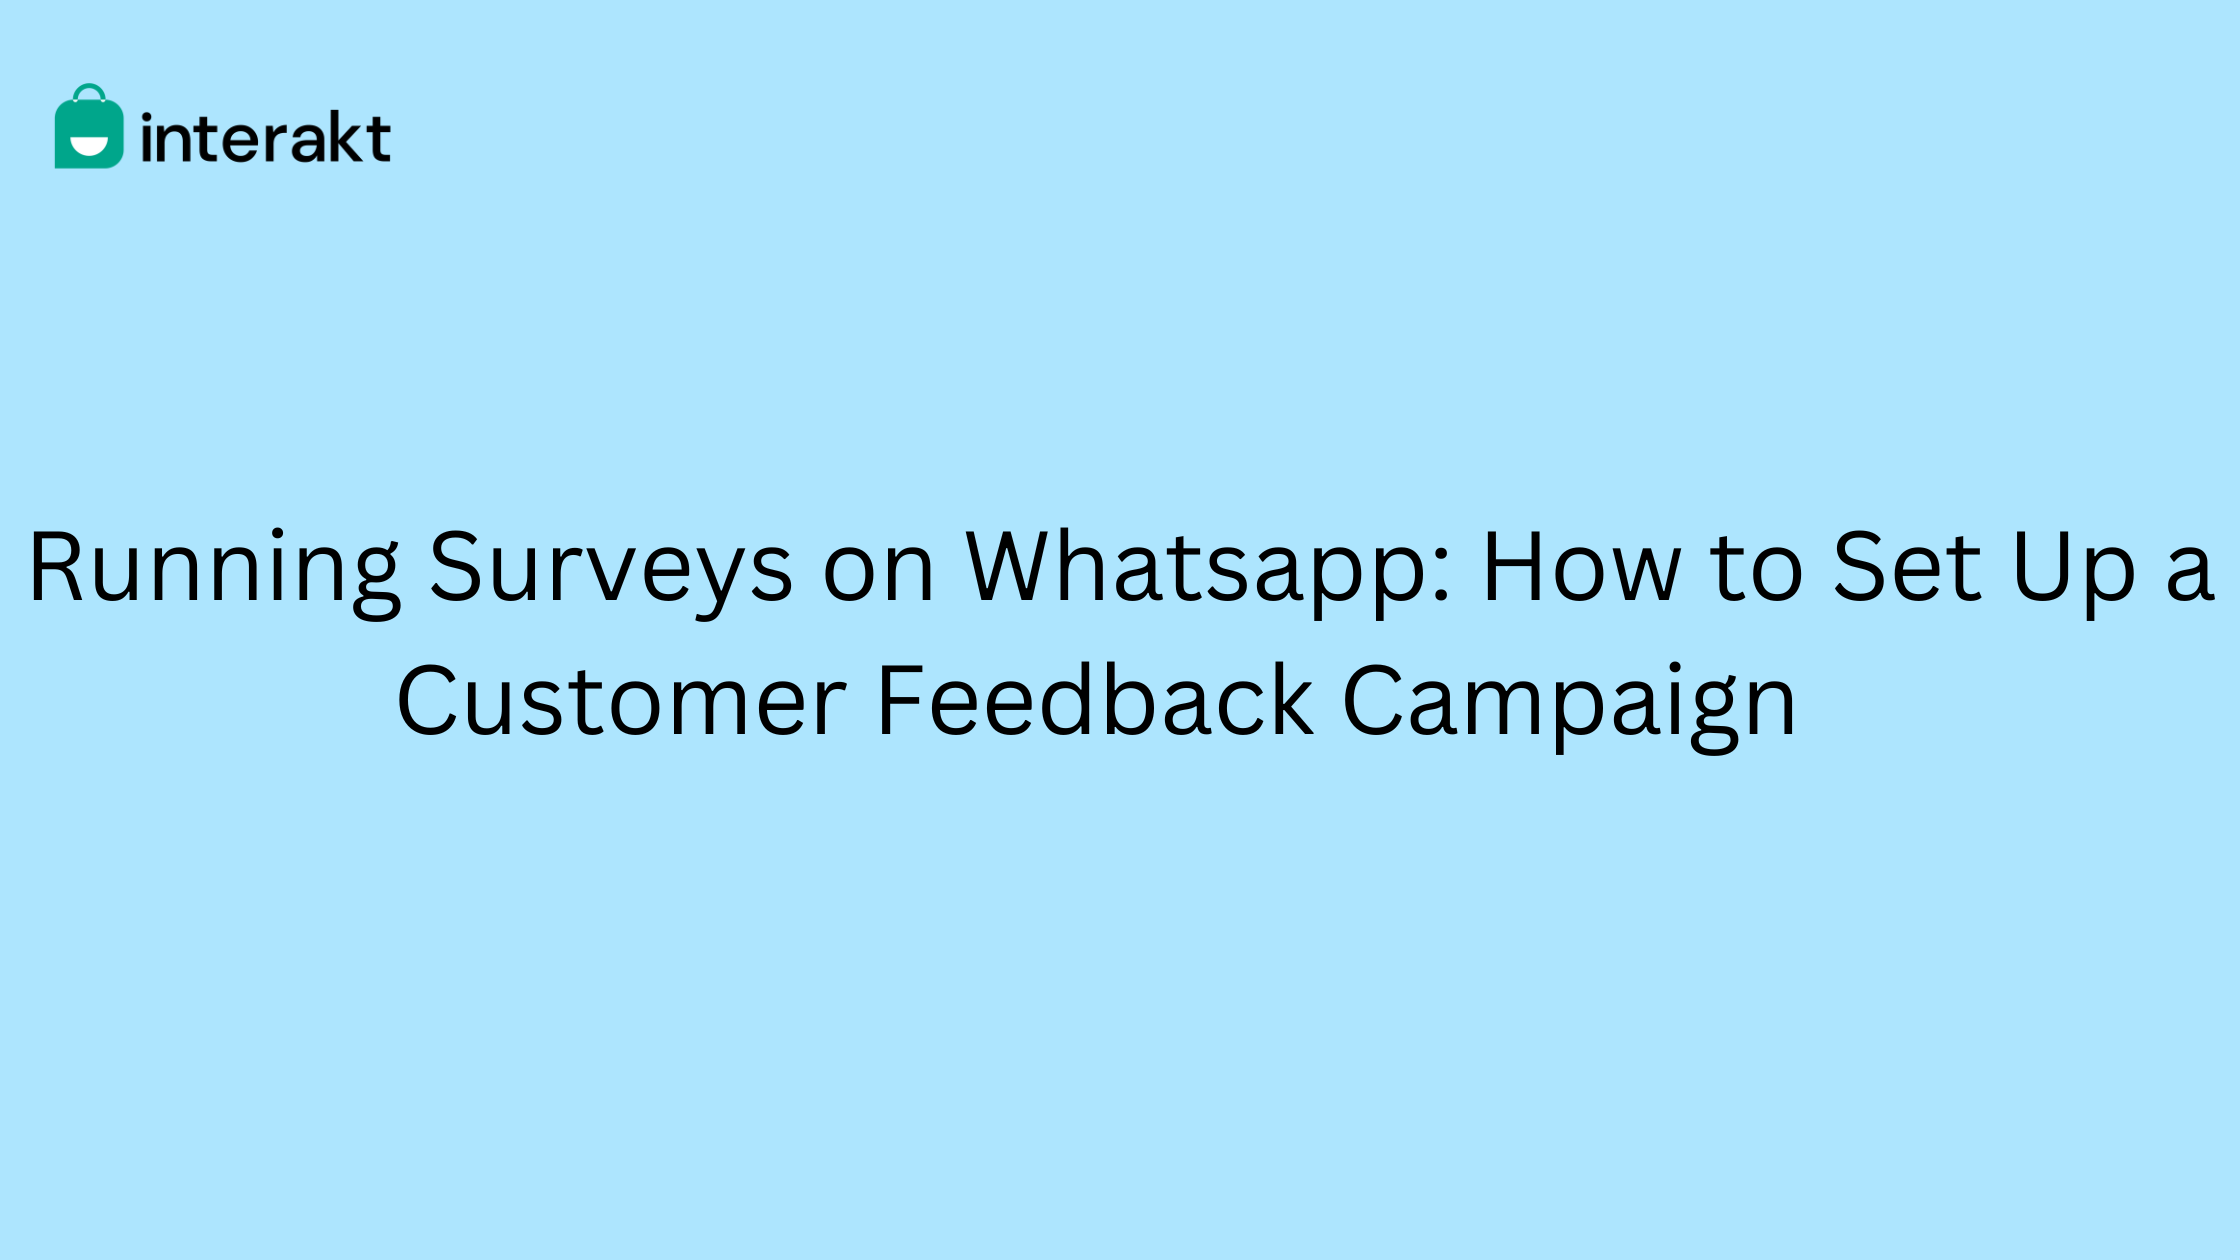 Running Surveys on Whatsapp How to Set Up a Customer Feedback Campaign